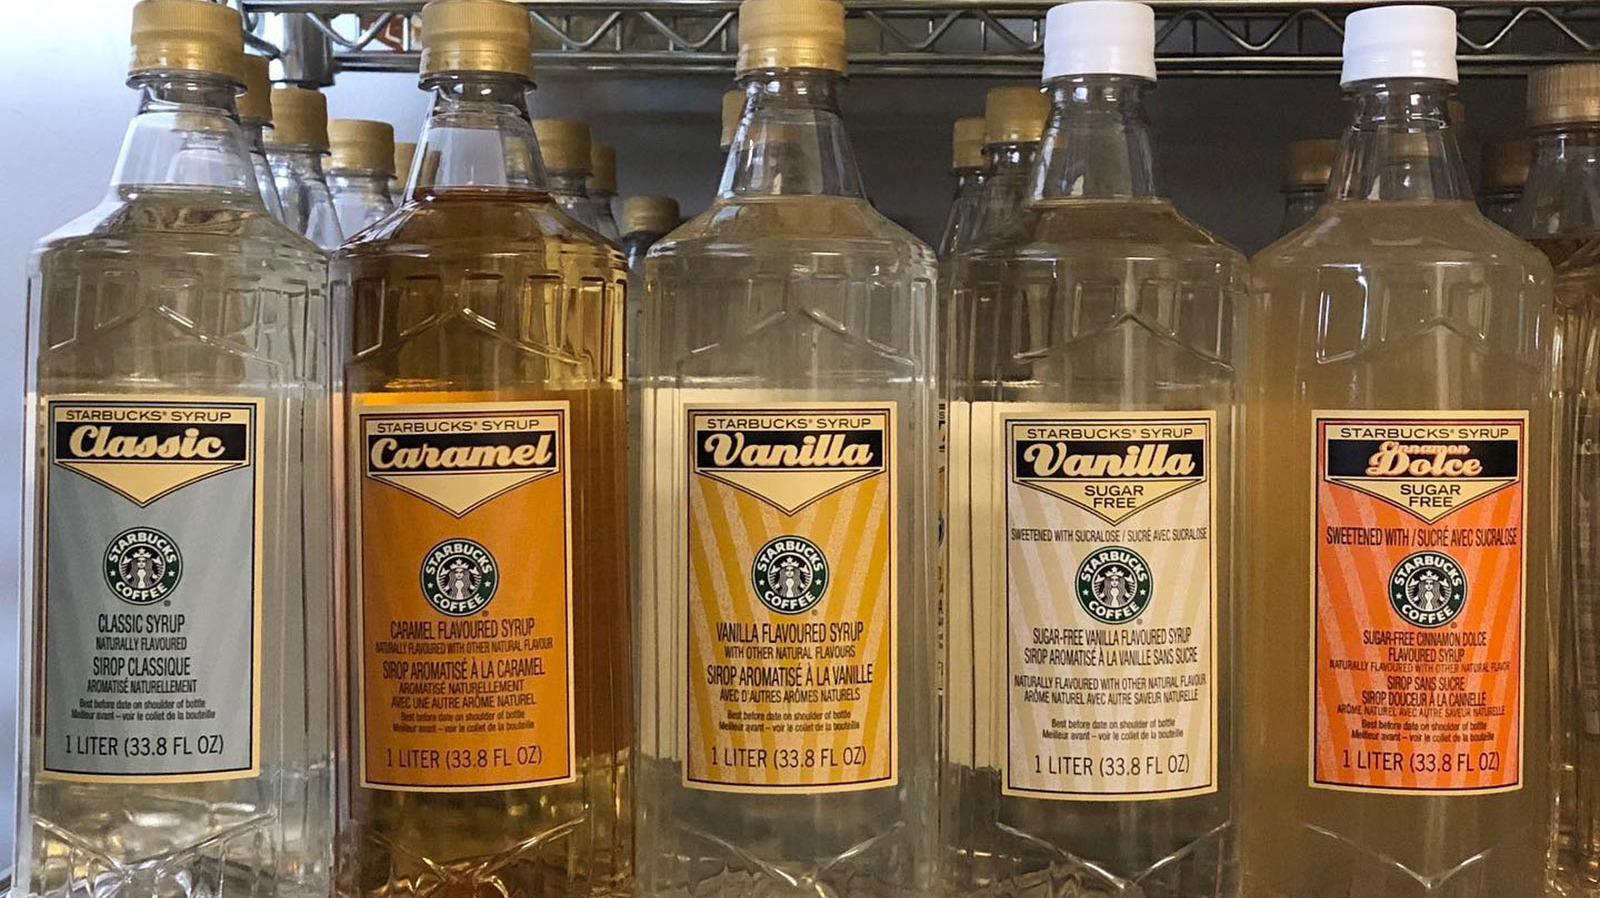 Where does Starbucks vanilla flavoring come from?